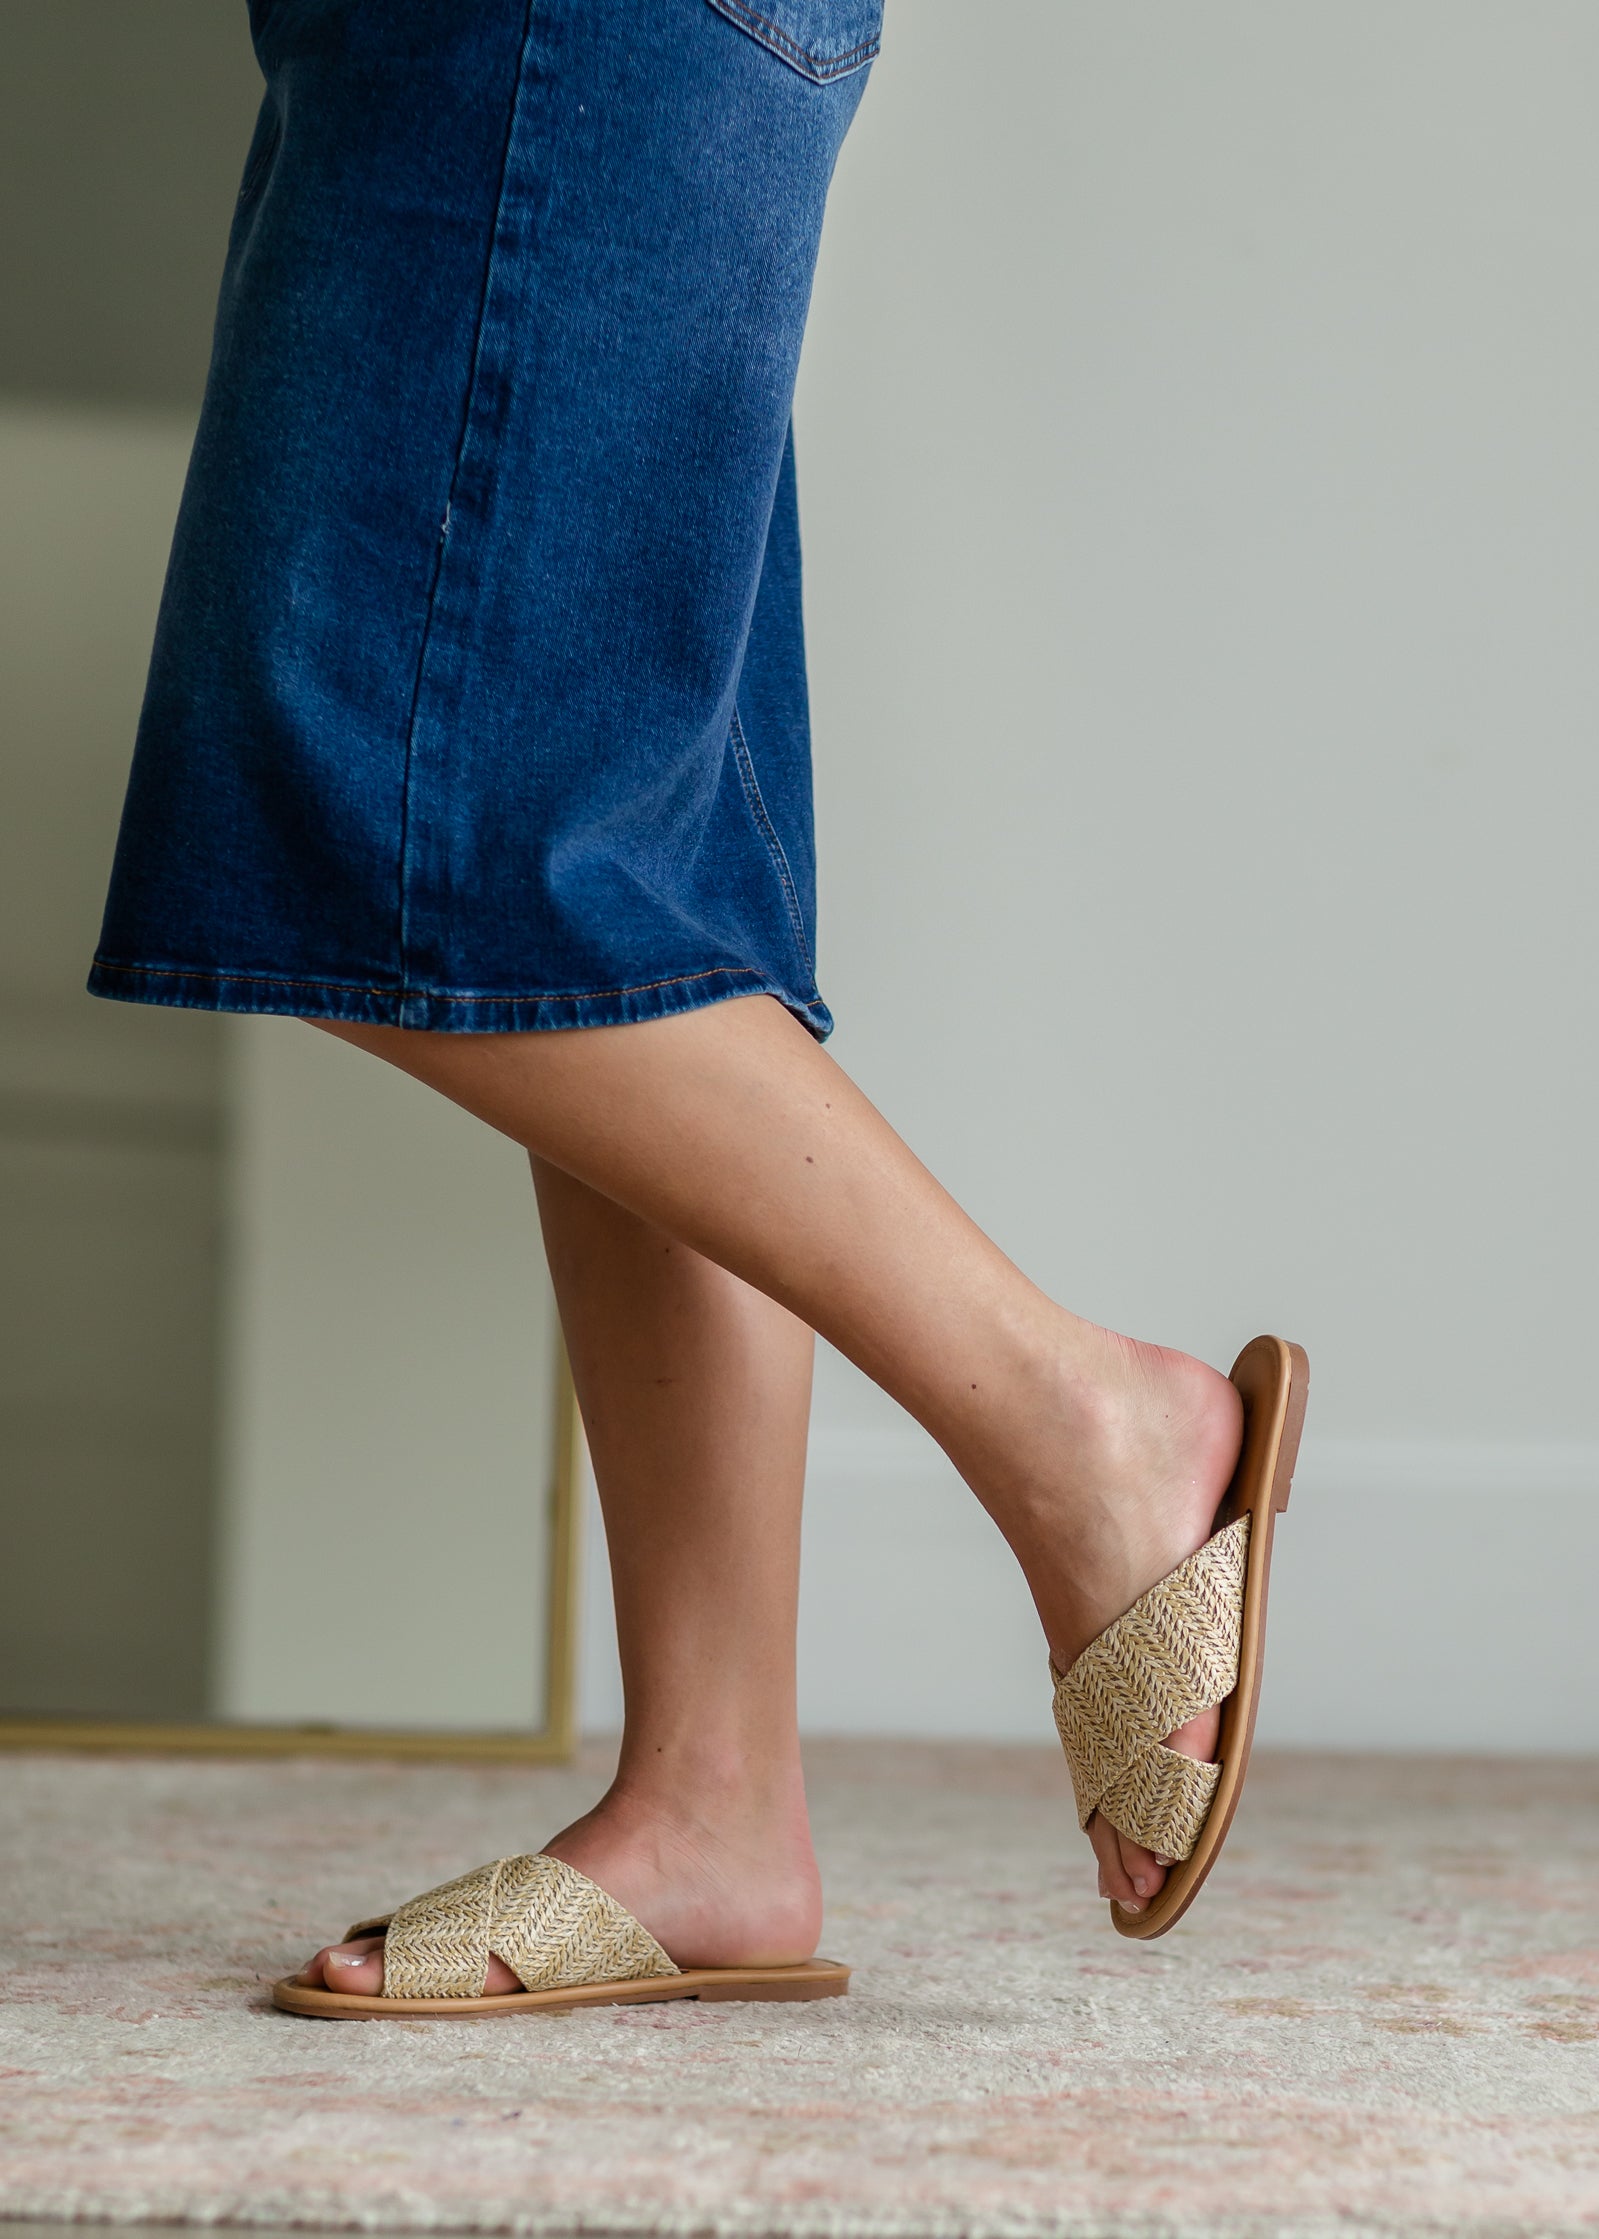 The Good Vibration Sandals are an easy choice and a fan favorite for the summer! Slip these raffia sandals on with just about any outfit and you're set with style and comfort!